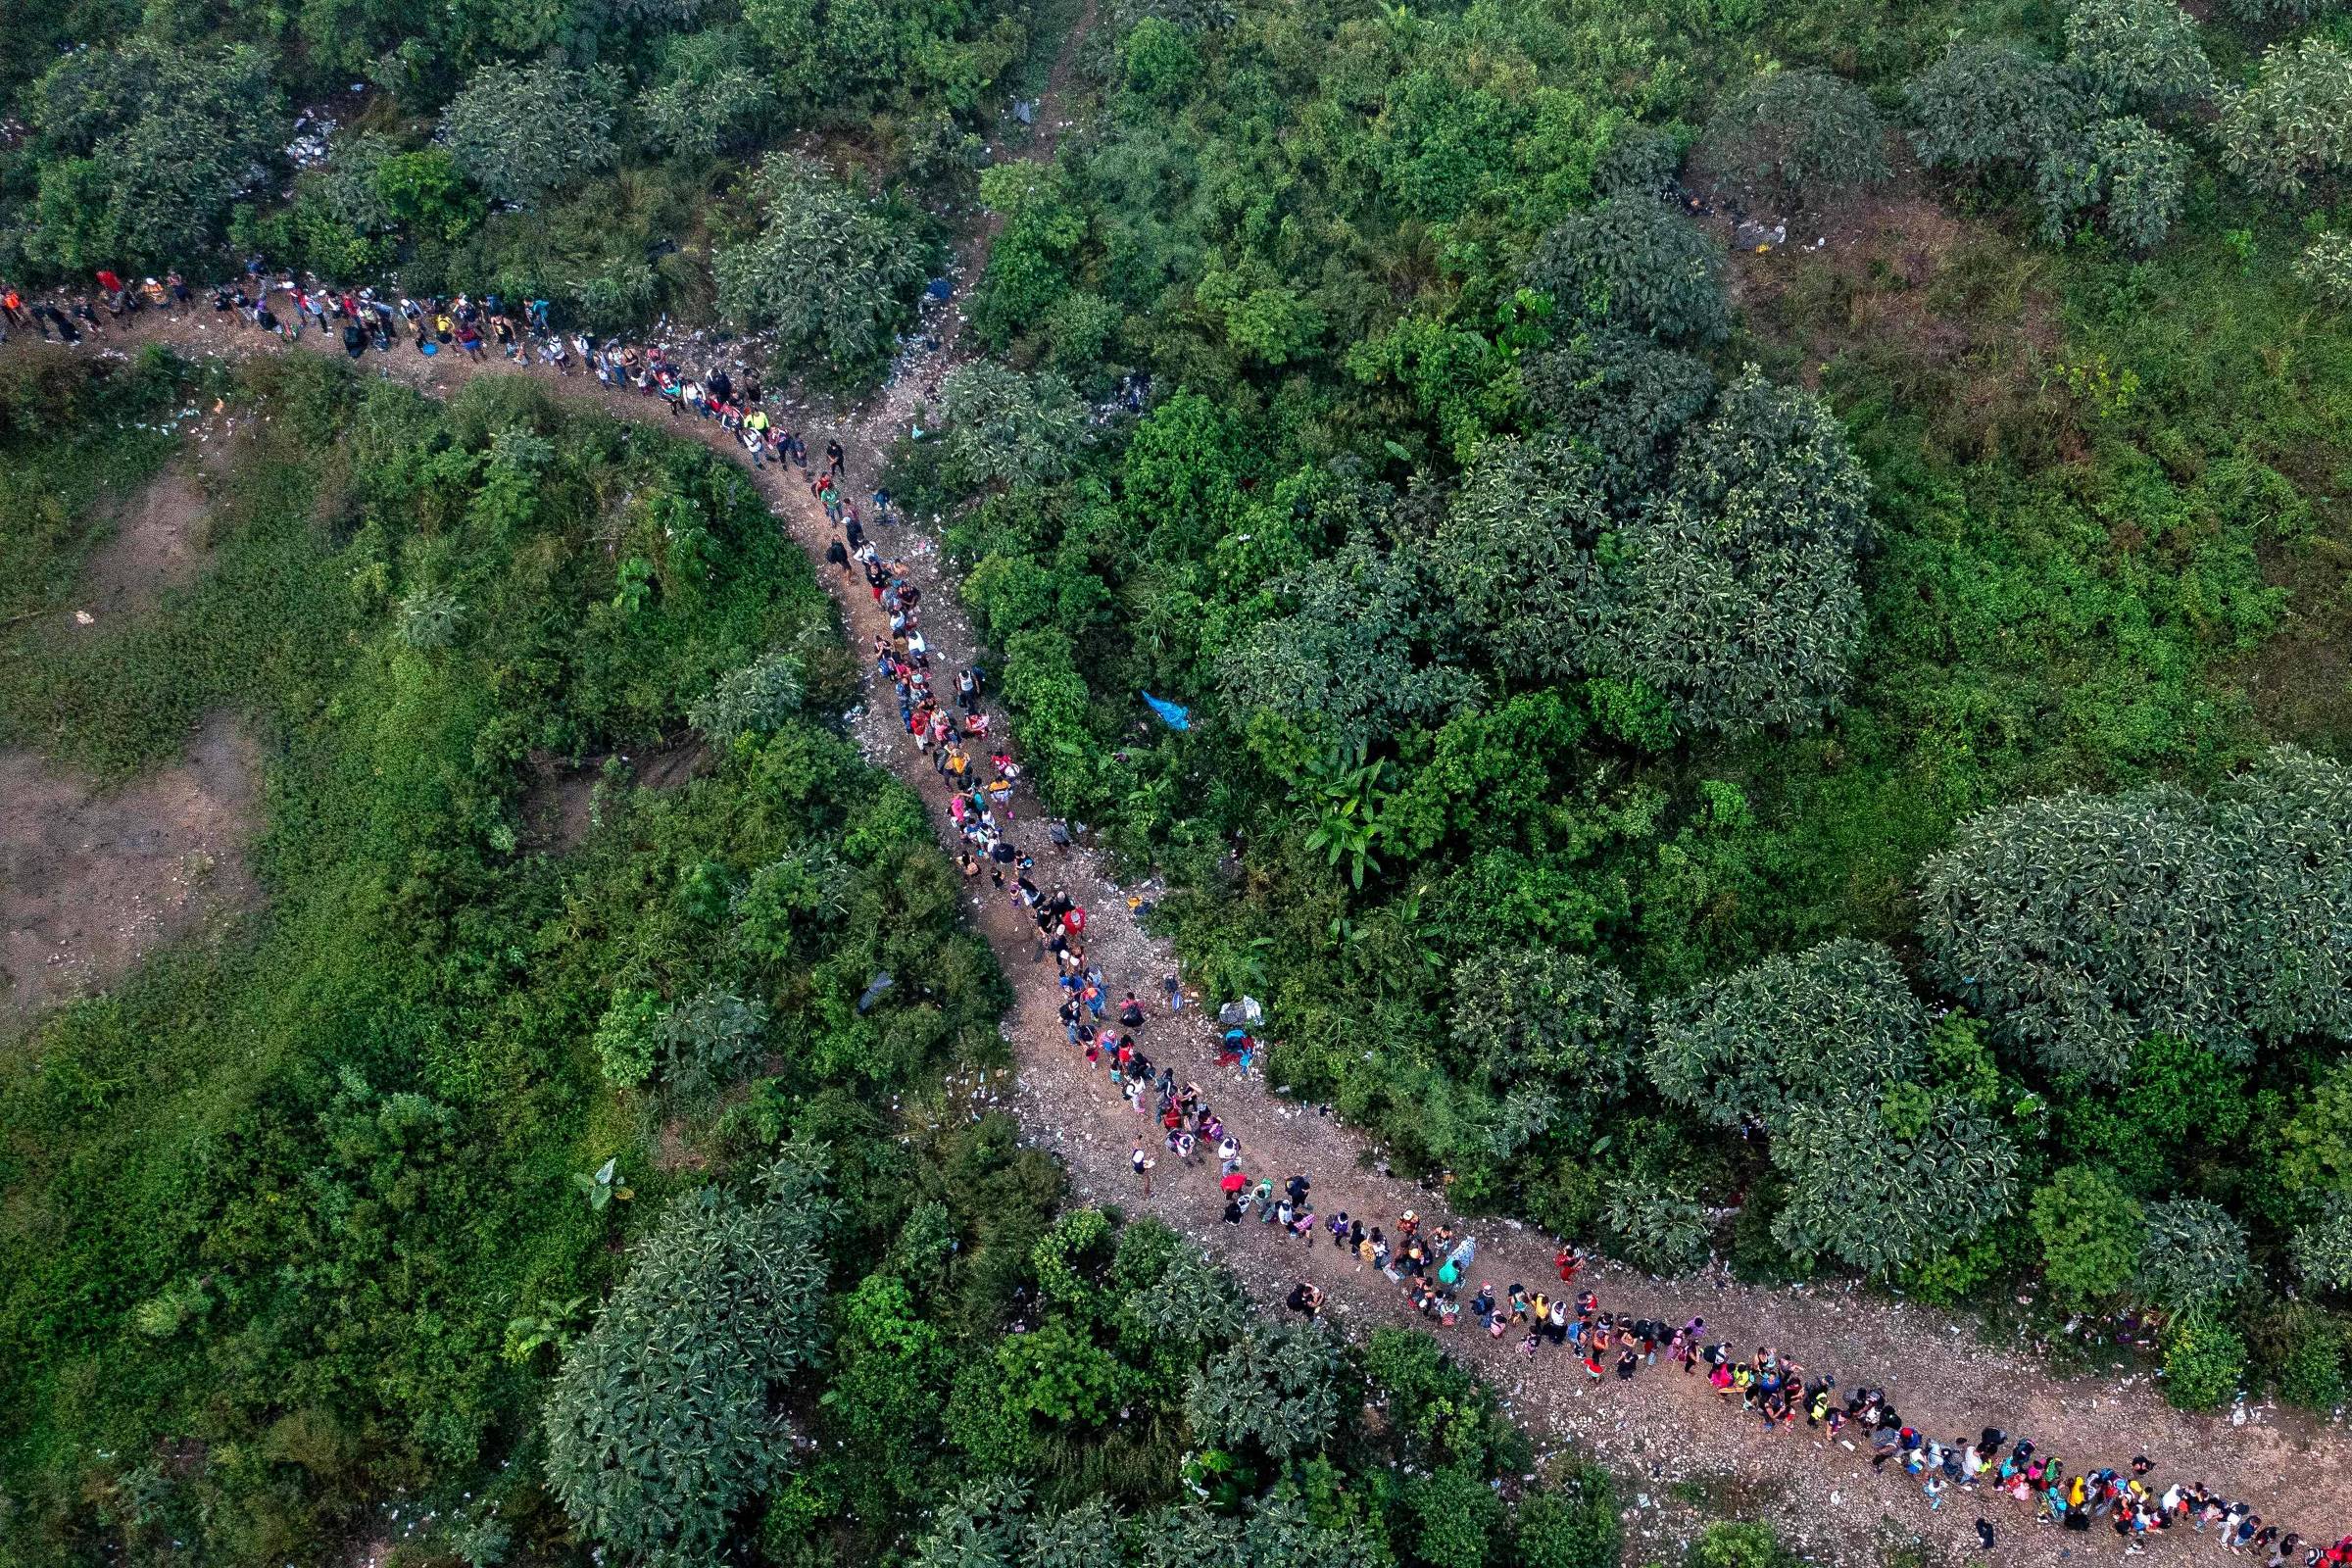 Crossings in Darién, the ‘jungle of death’, exceed 400,000 and break a new record